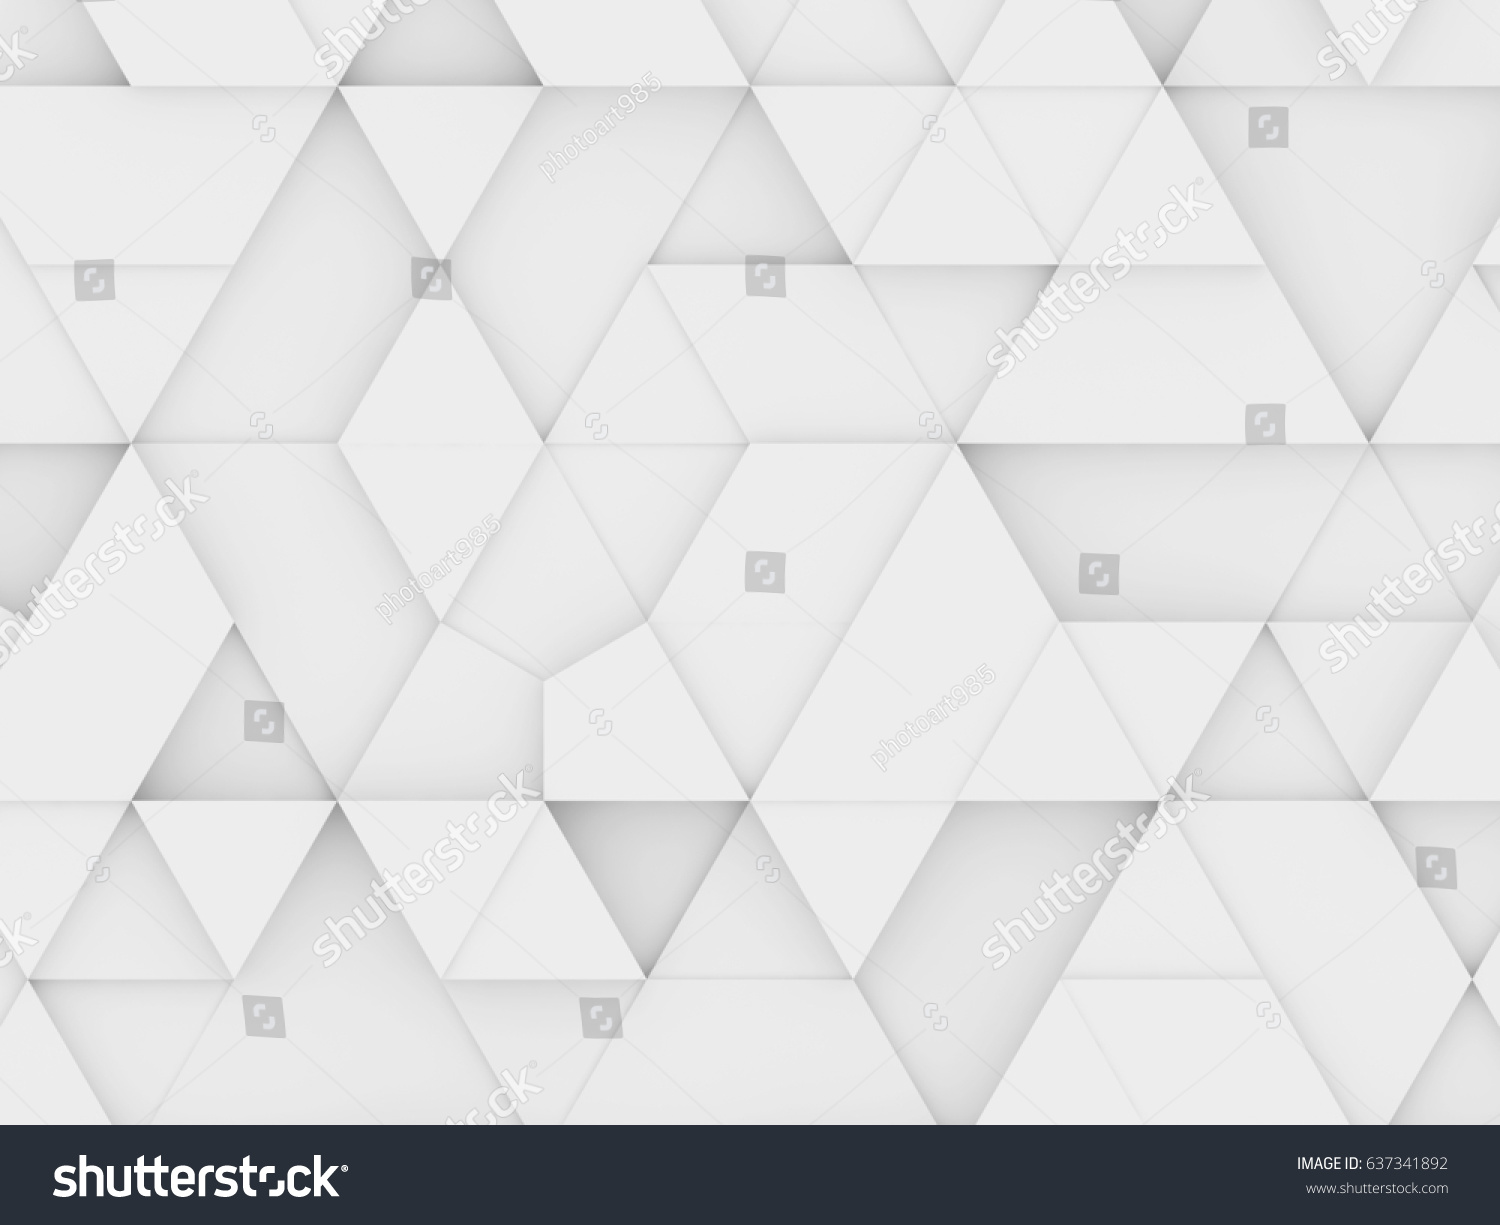 Equilateral Triangles White Abstract Background 3d Stock Illustration ...